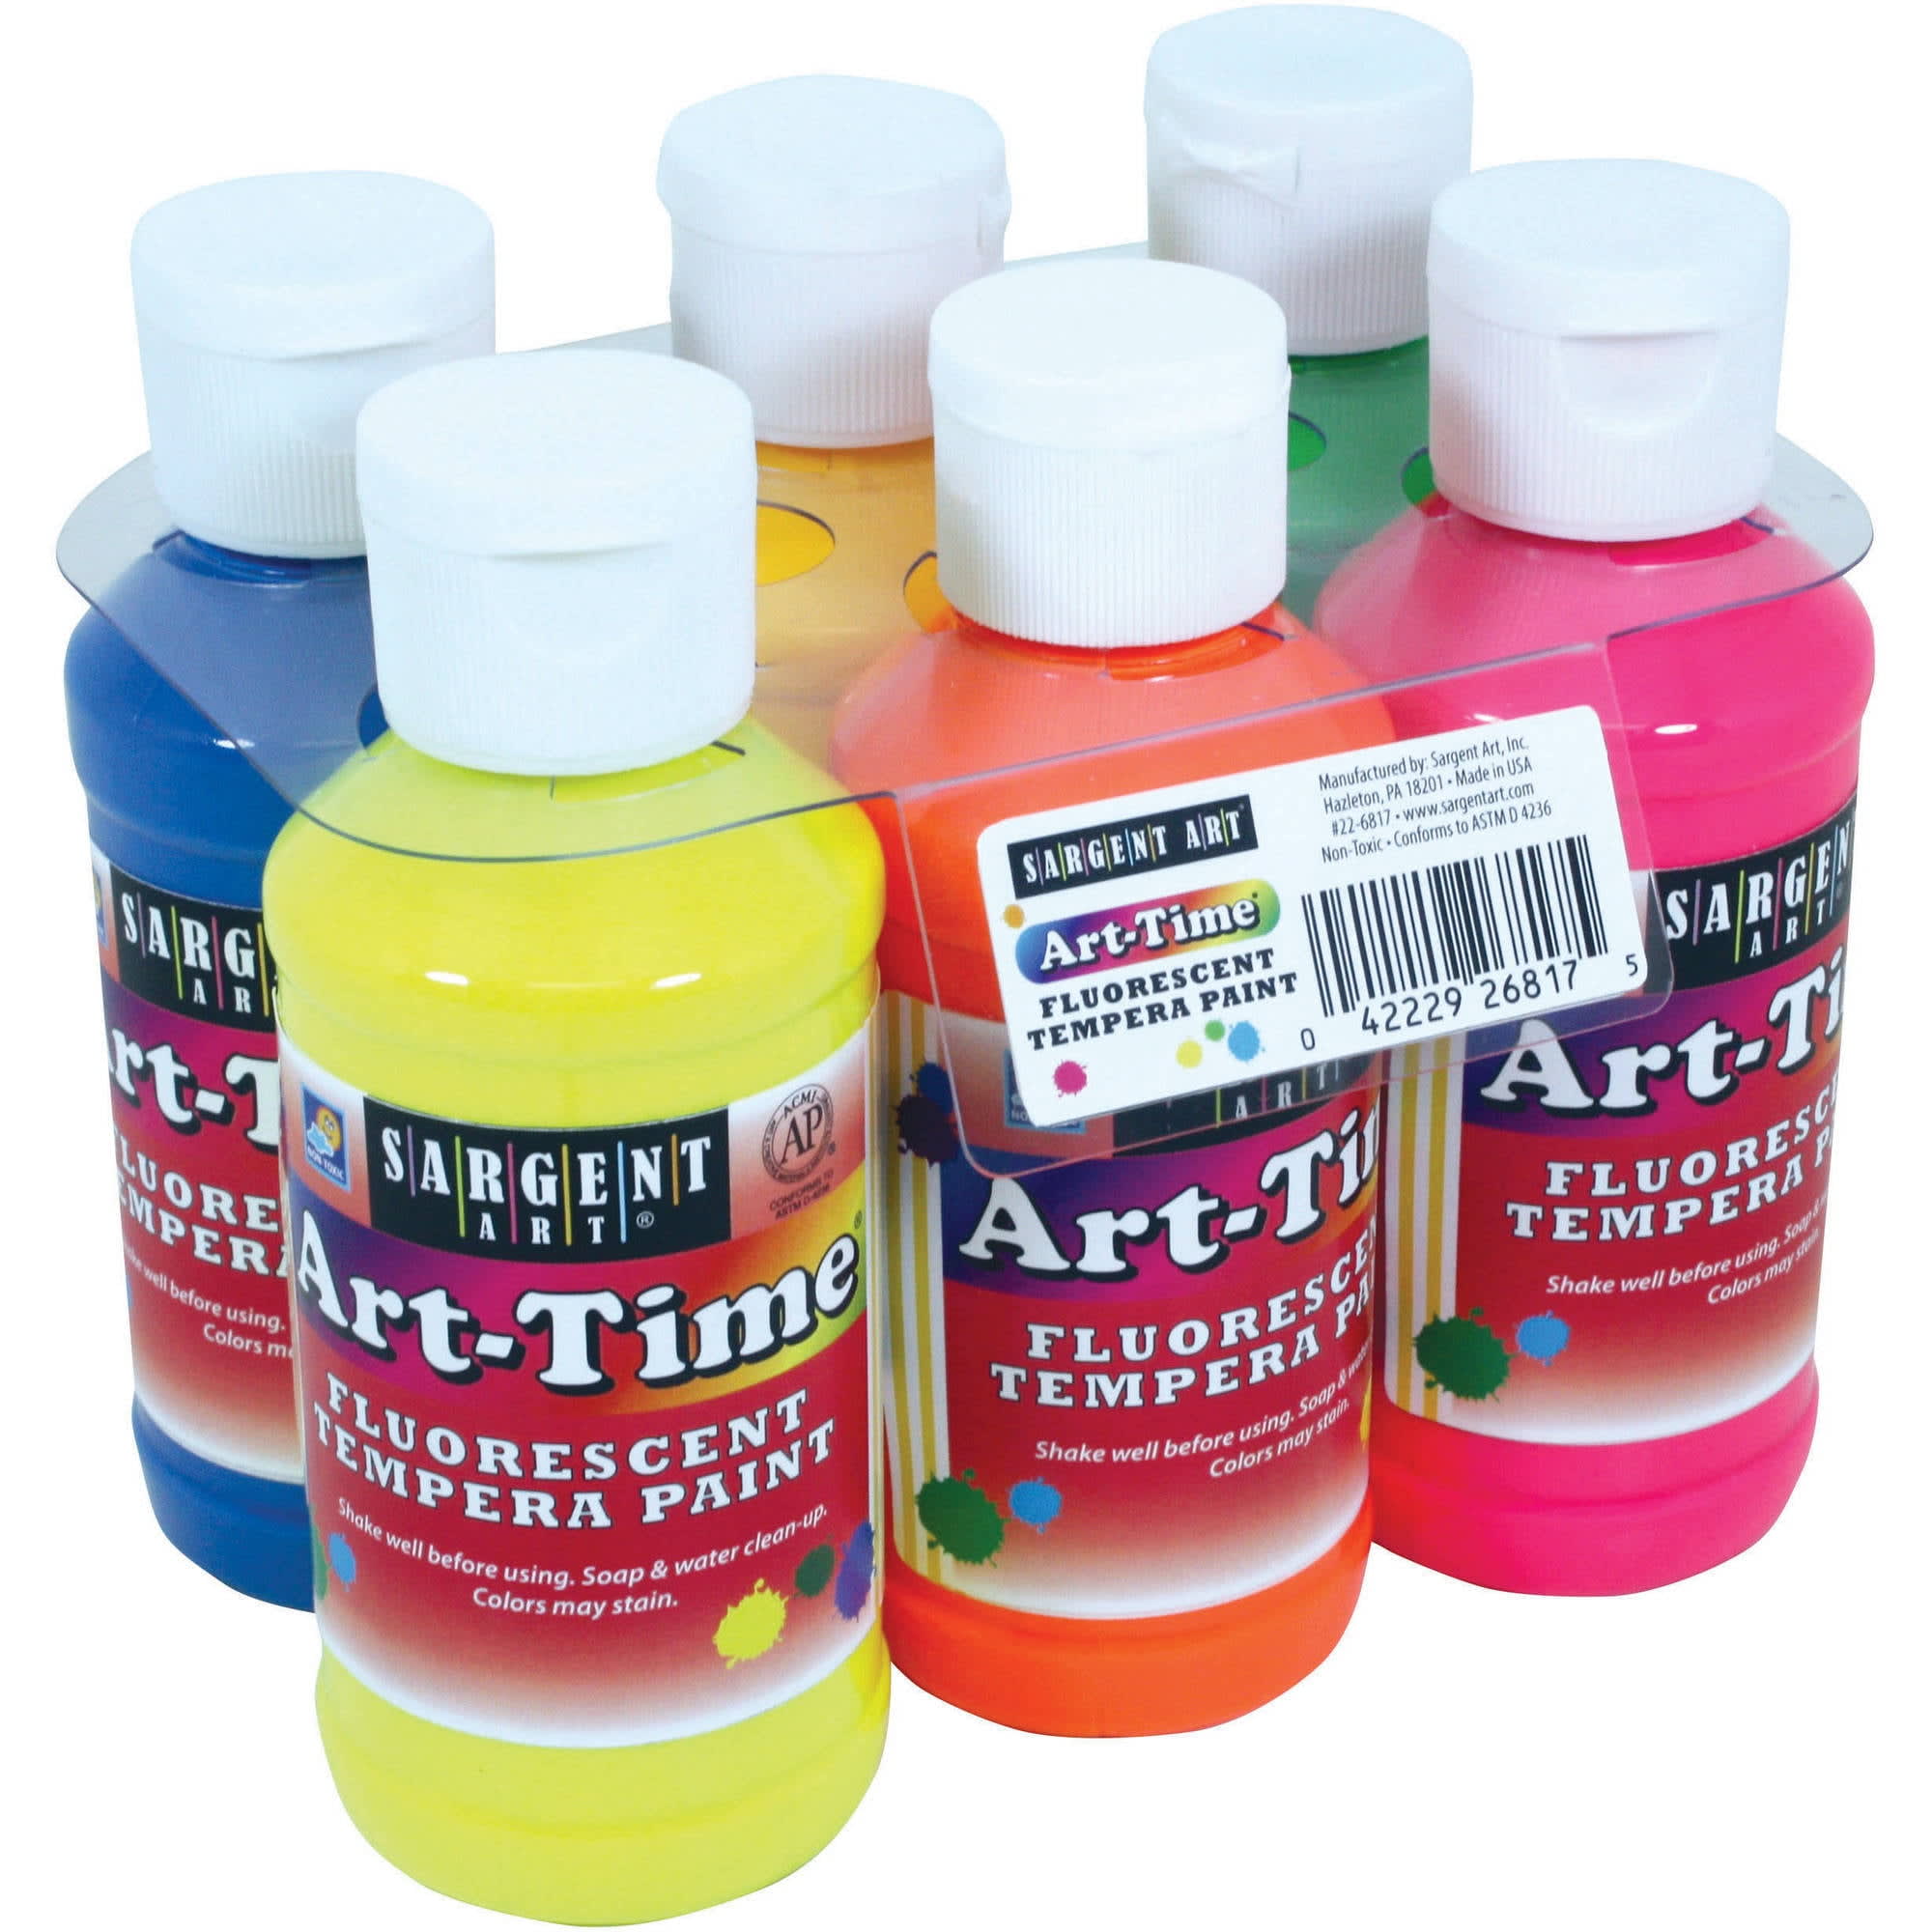 Cra-Z-Art 10 Count Multicolor Washable Paint, Ages 3 and up, Easter Gift  for Kids - DroneUp Delivery